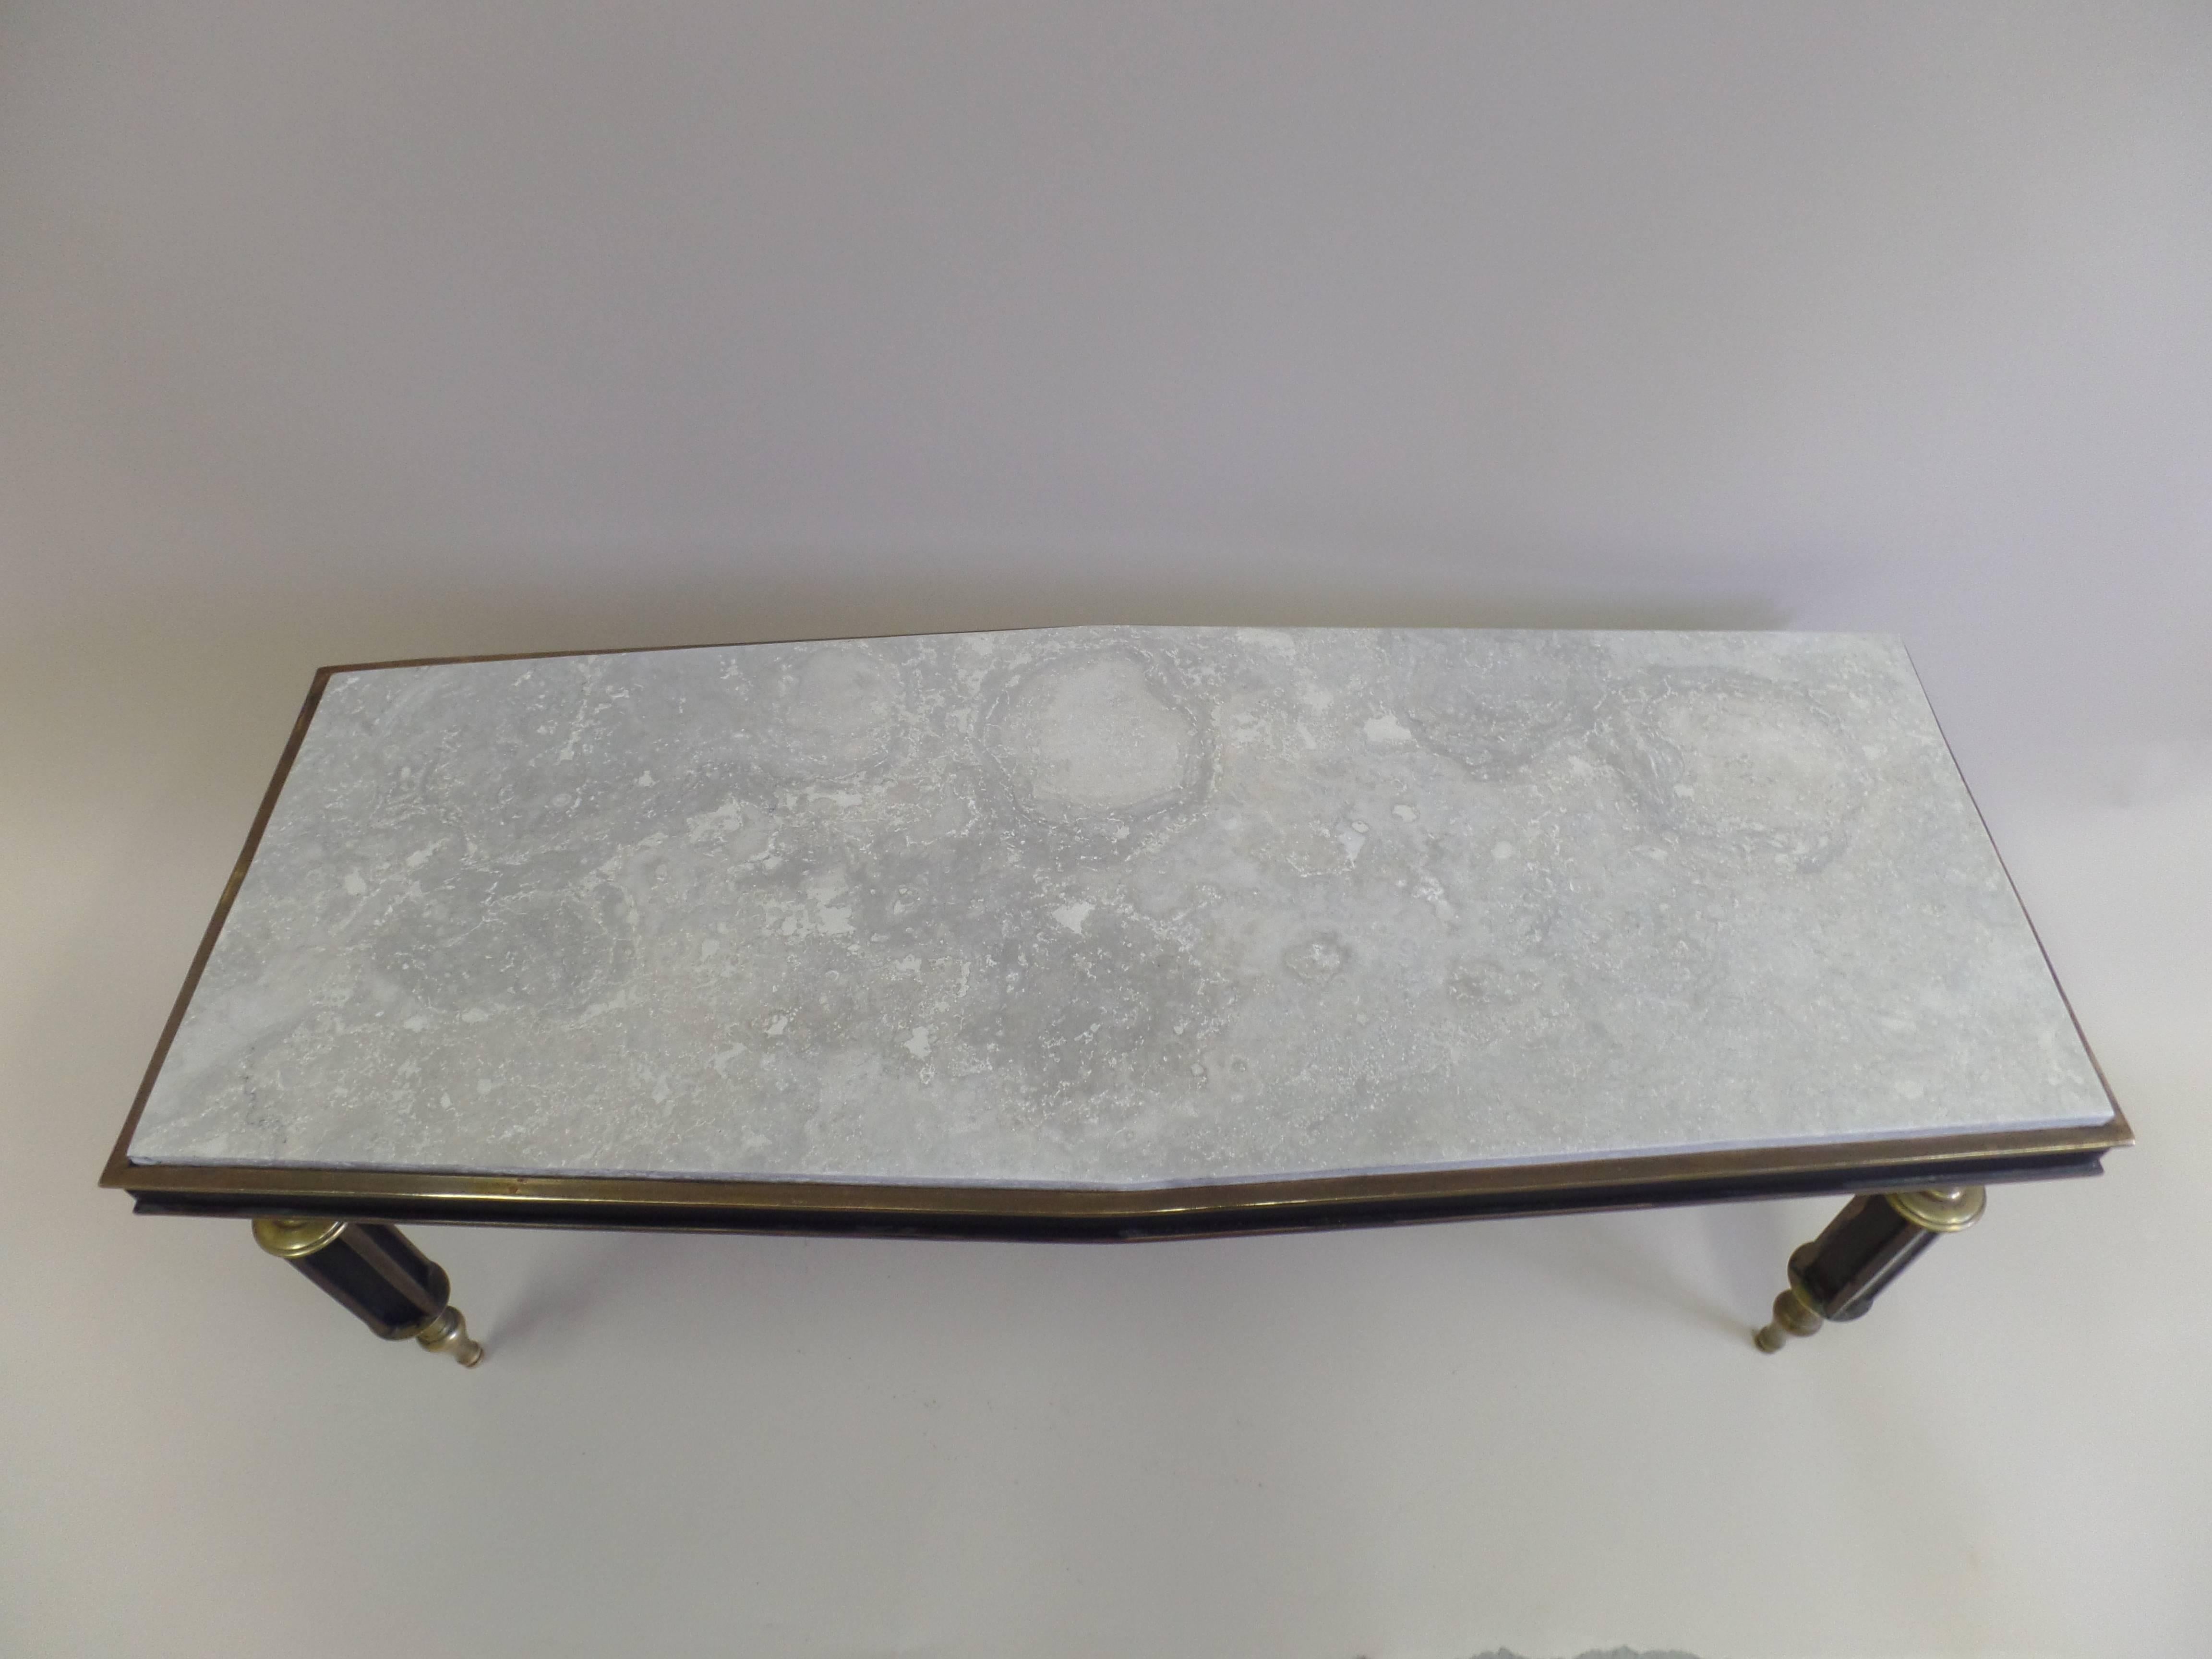 Rare Italian Modern Neoclassical Gilt Bronze Coffee Table Attr. to Gio Ponti In Good Condition For Sale In New York, NY